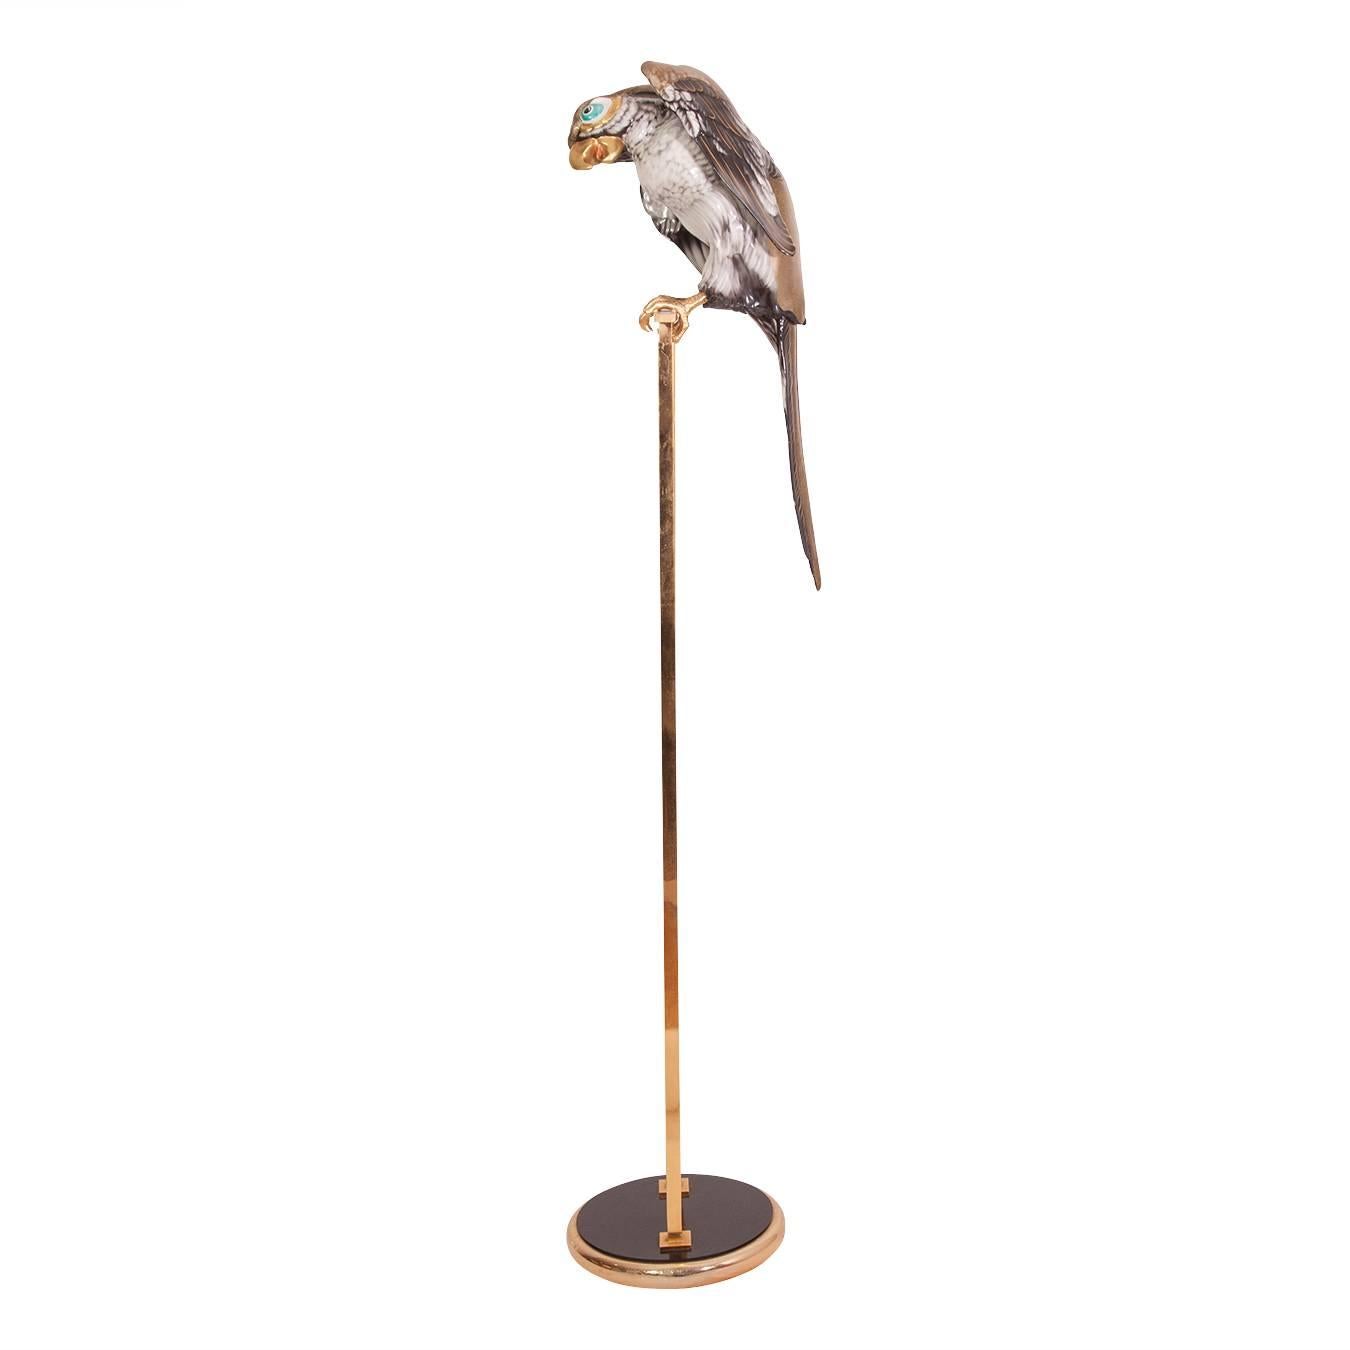 Beautiful ceramic-enameled parrot perched on brass stand.